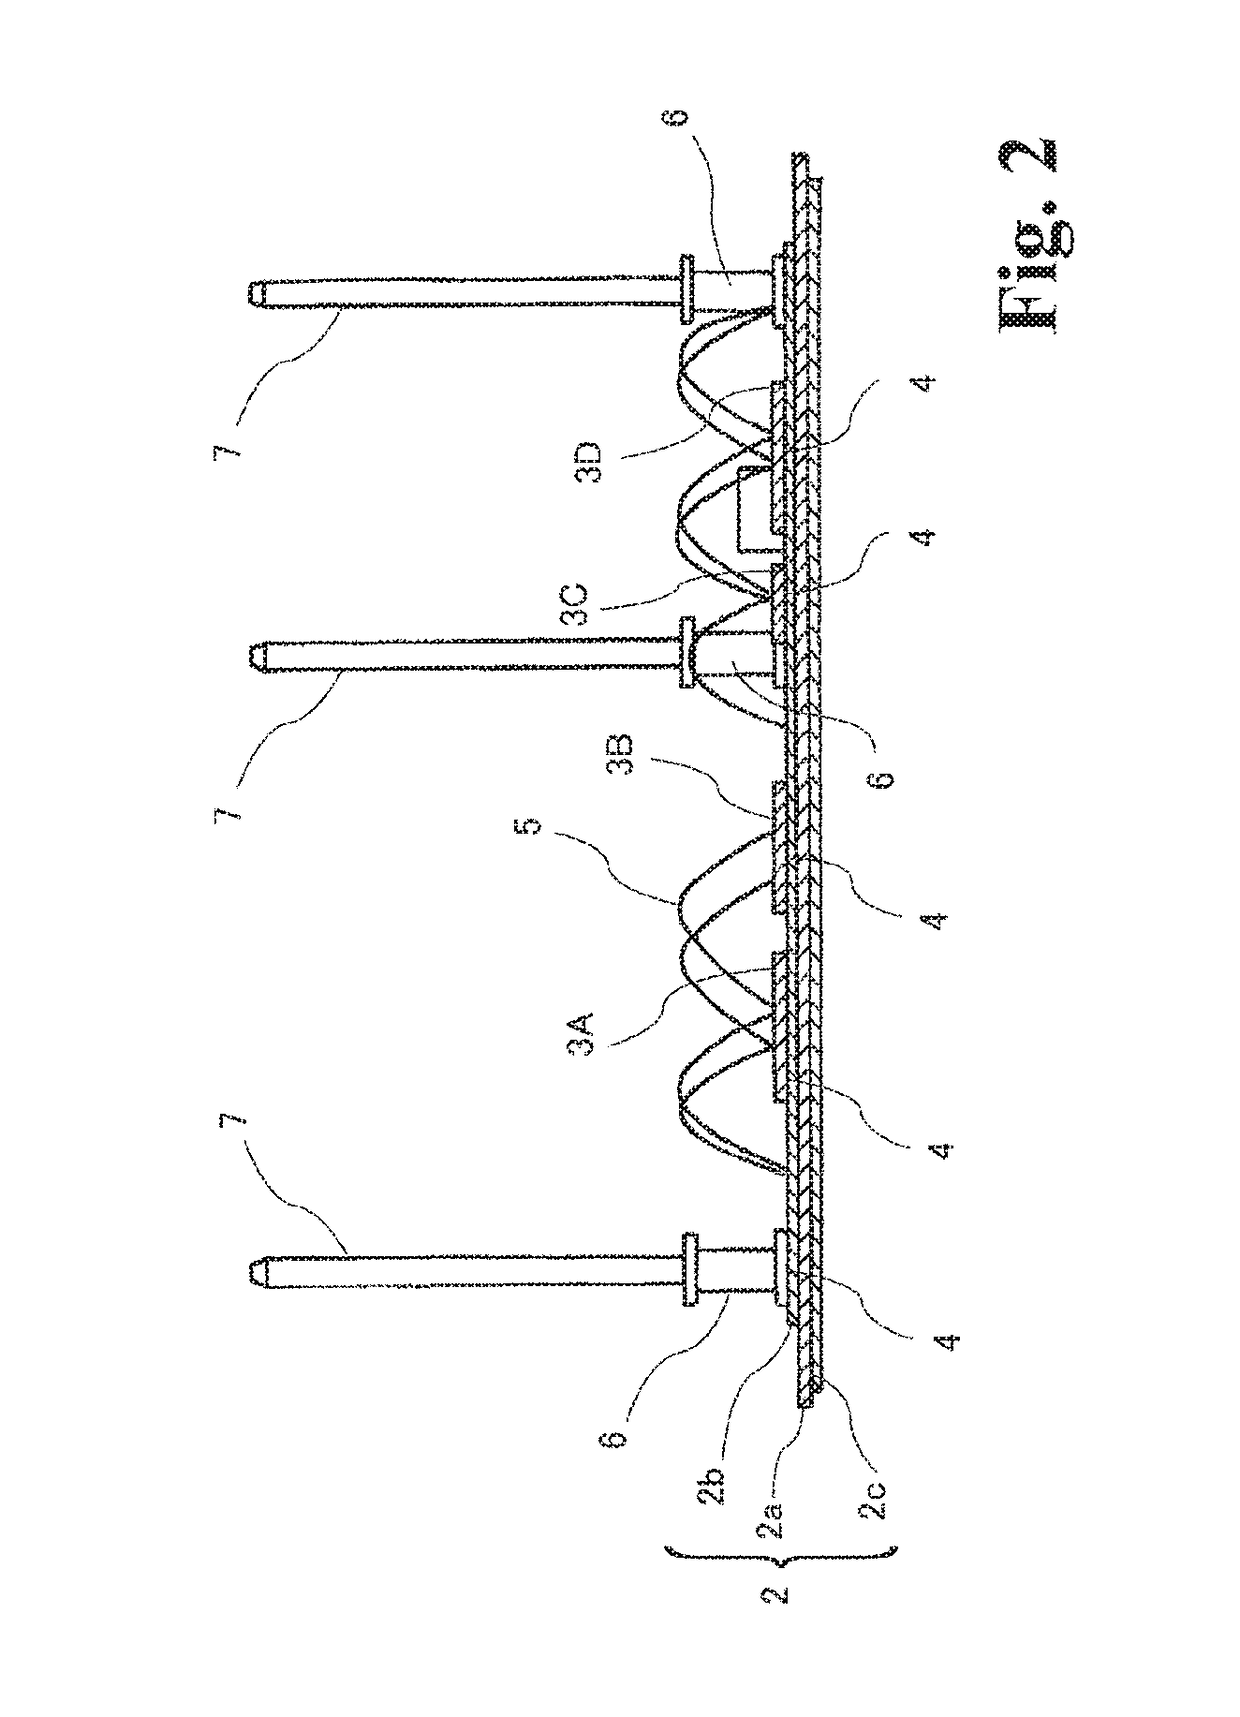 Mounting jig for semiconductor device